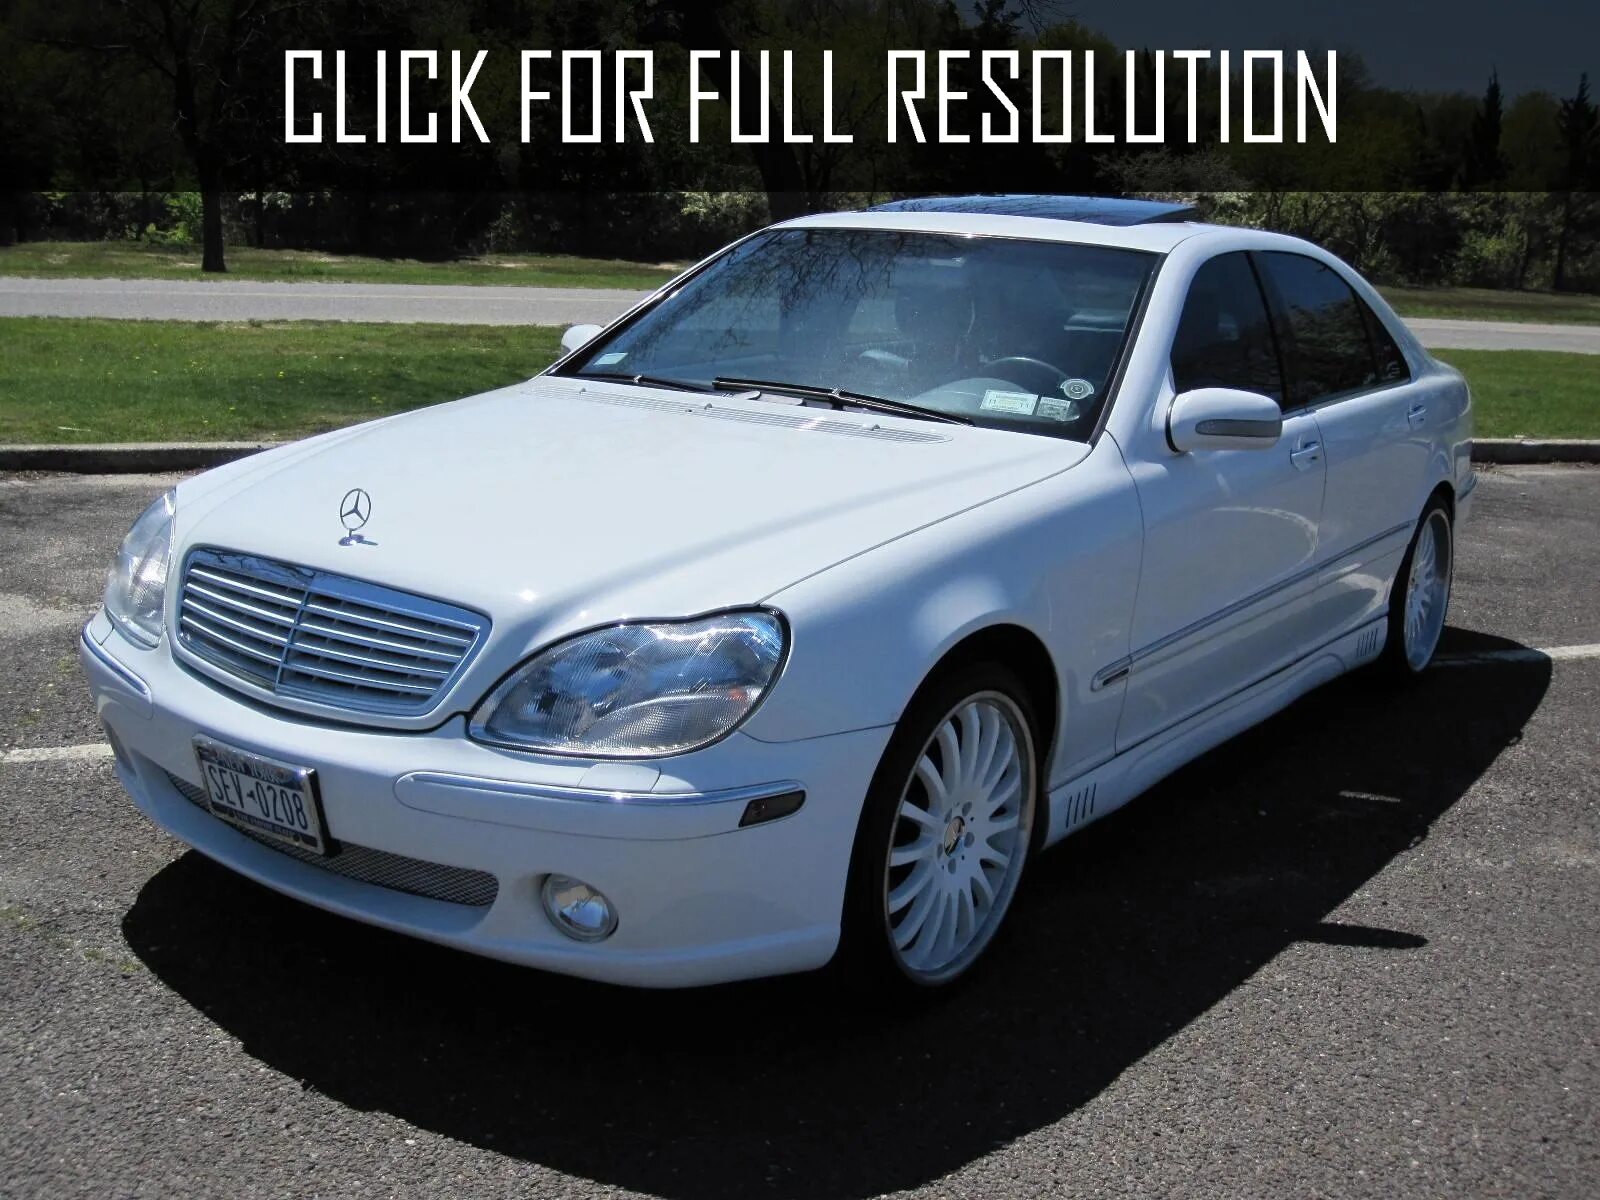 Mercedes s class 2000. Мерседес Бенц s класс 2000. Мерседес 2000 года. Мерседес Бенц s класс 2000 года. С класс 2000 года